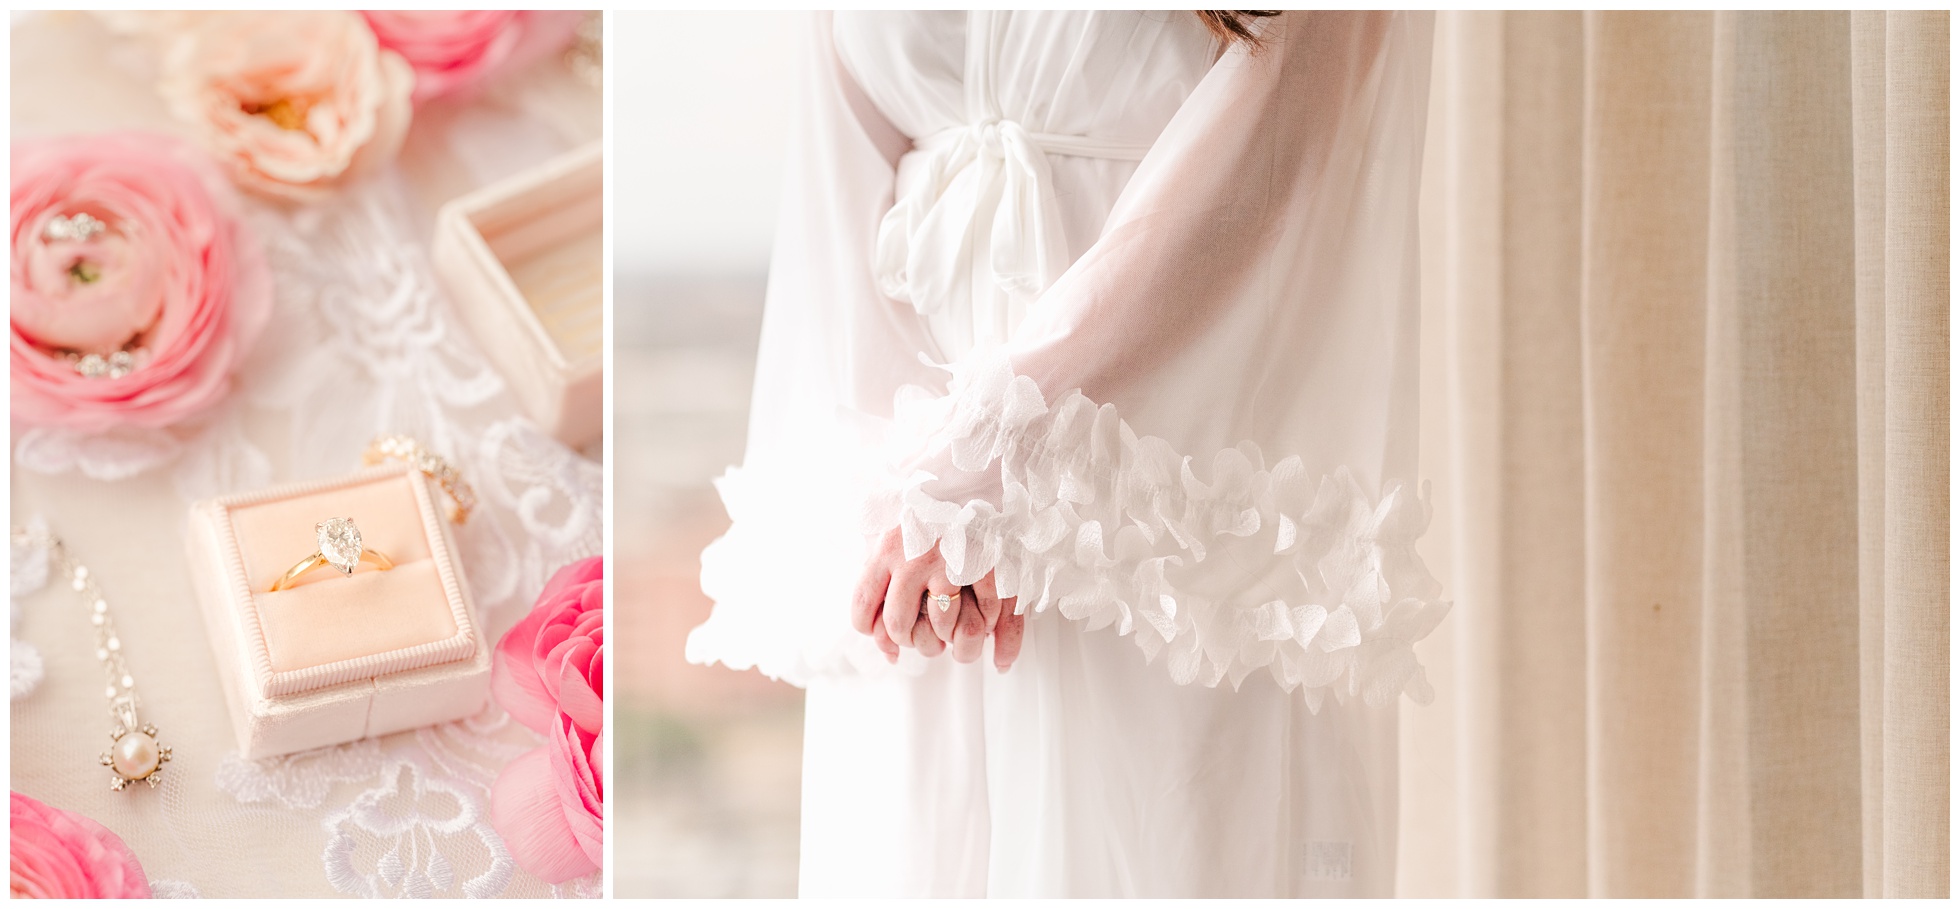 Bridal details with flowers, jewelry, and ruffled white robe. 